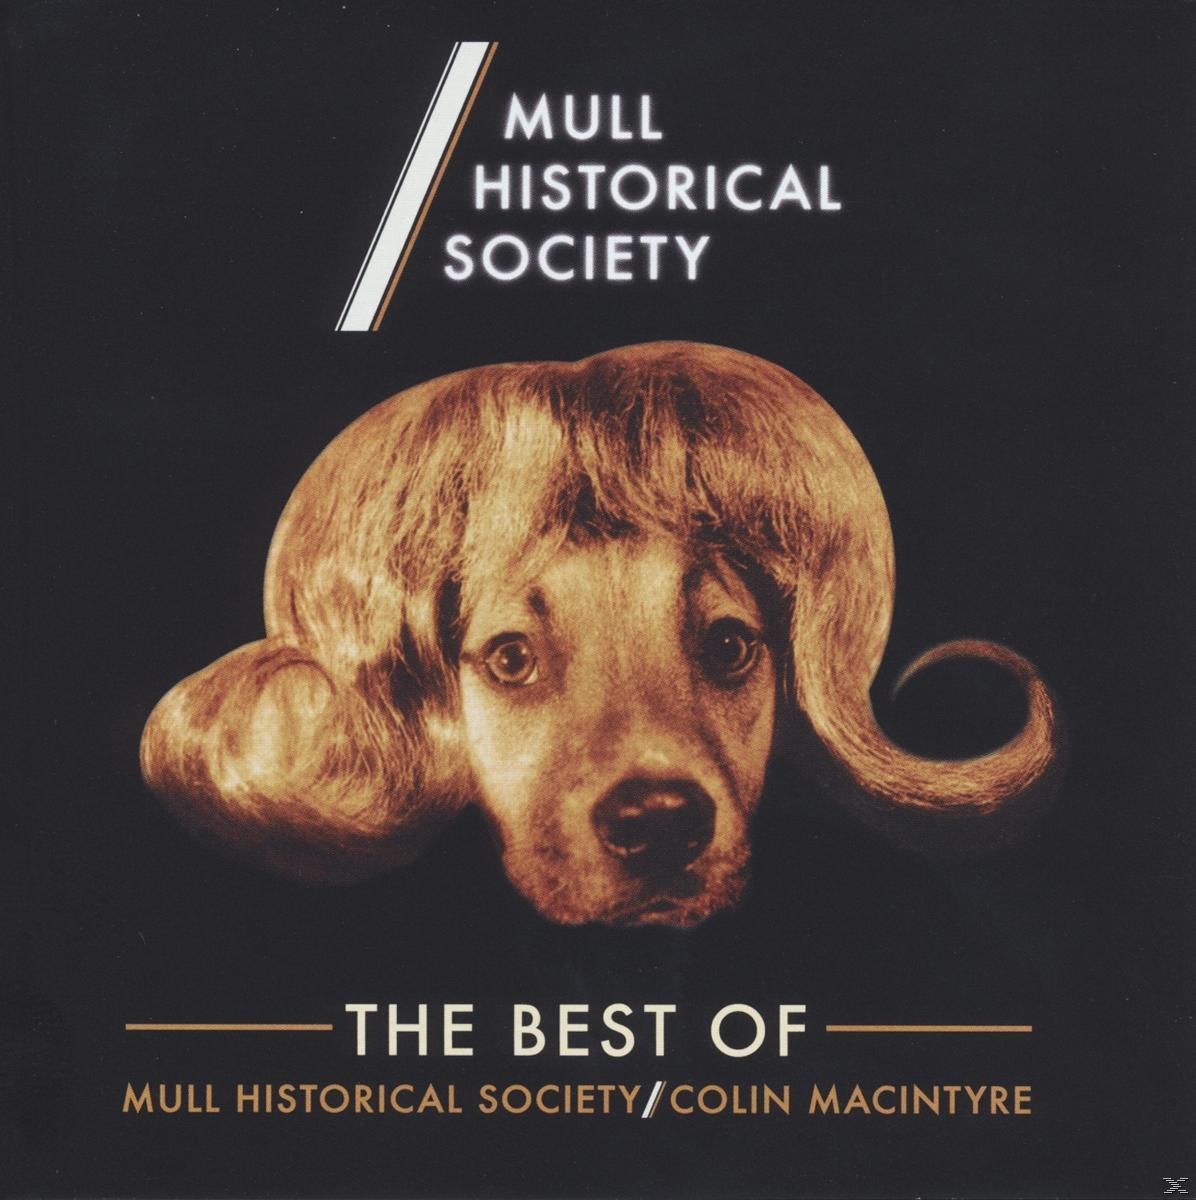 Mull Historical - - Society Of Best The (CD) Macintyr Historical Society/Colin Mull